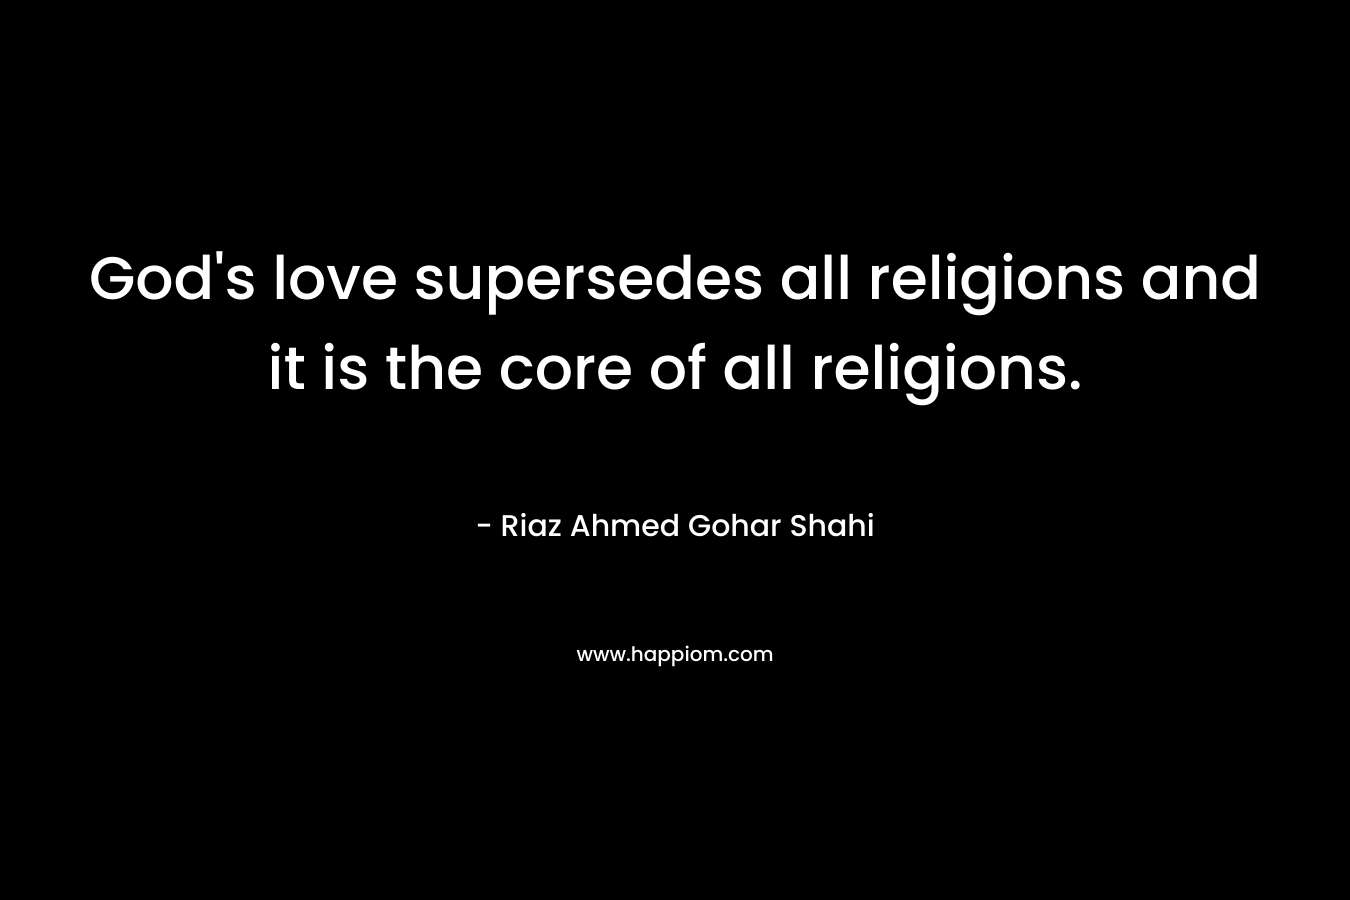 God’s love supersedes all religions and it is the core of all religions. – Riaz Ahmed Gohar Shahi